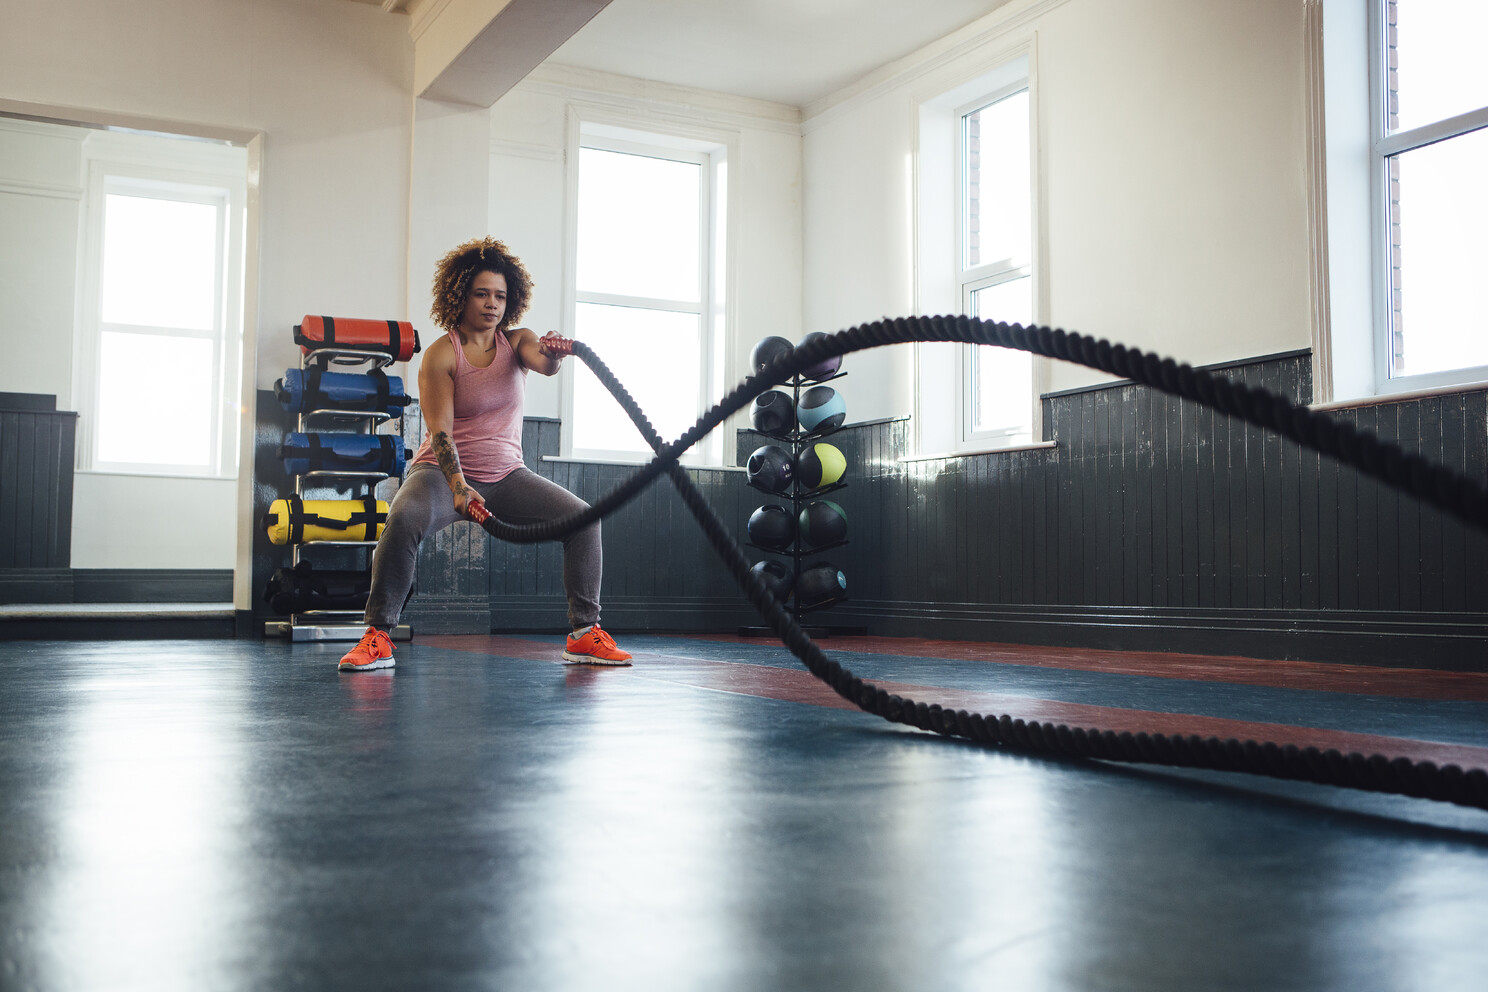 A strong woman alone in a gym, training with battle ropes